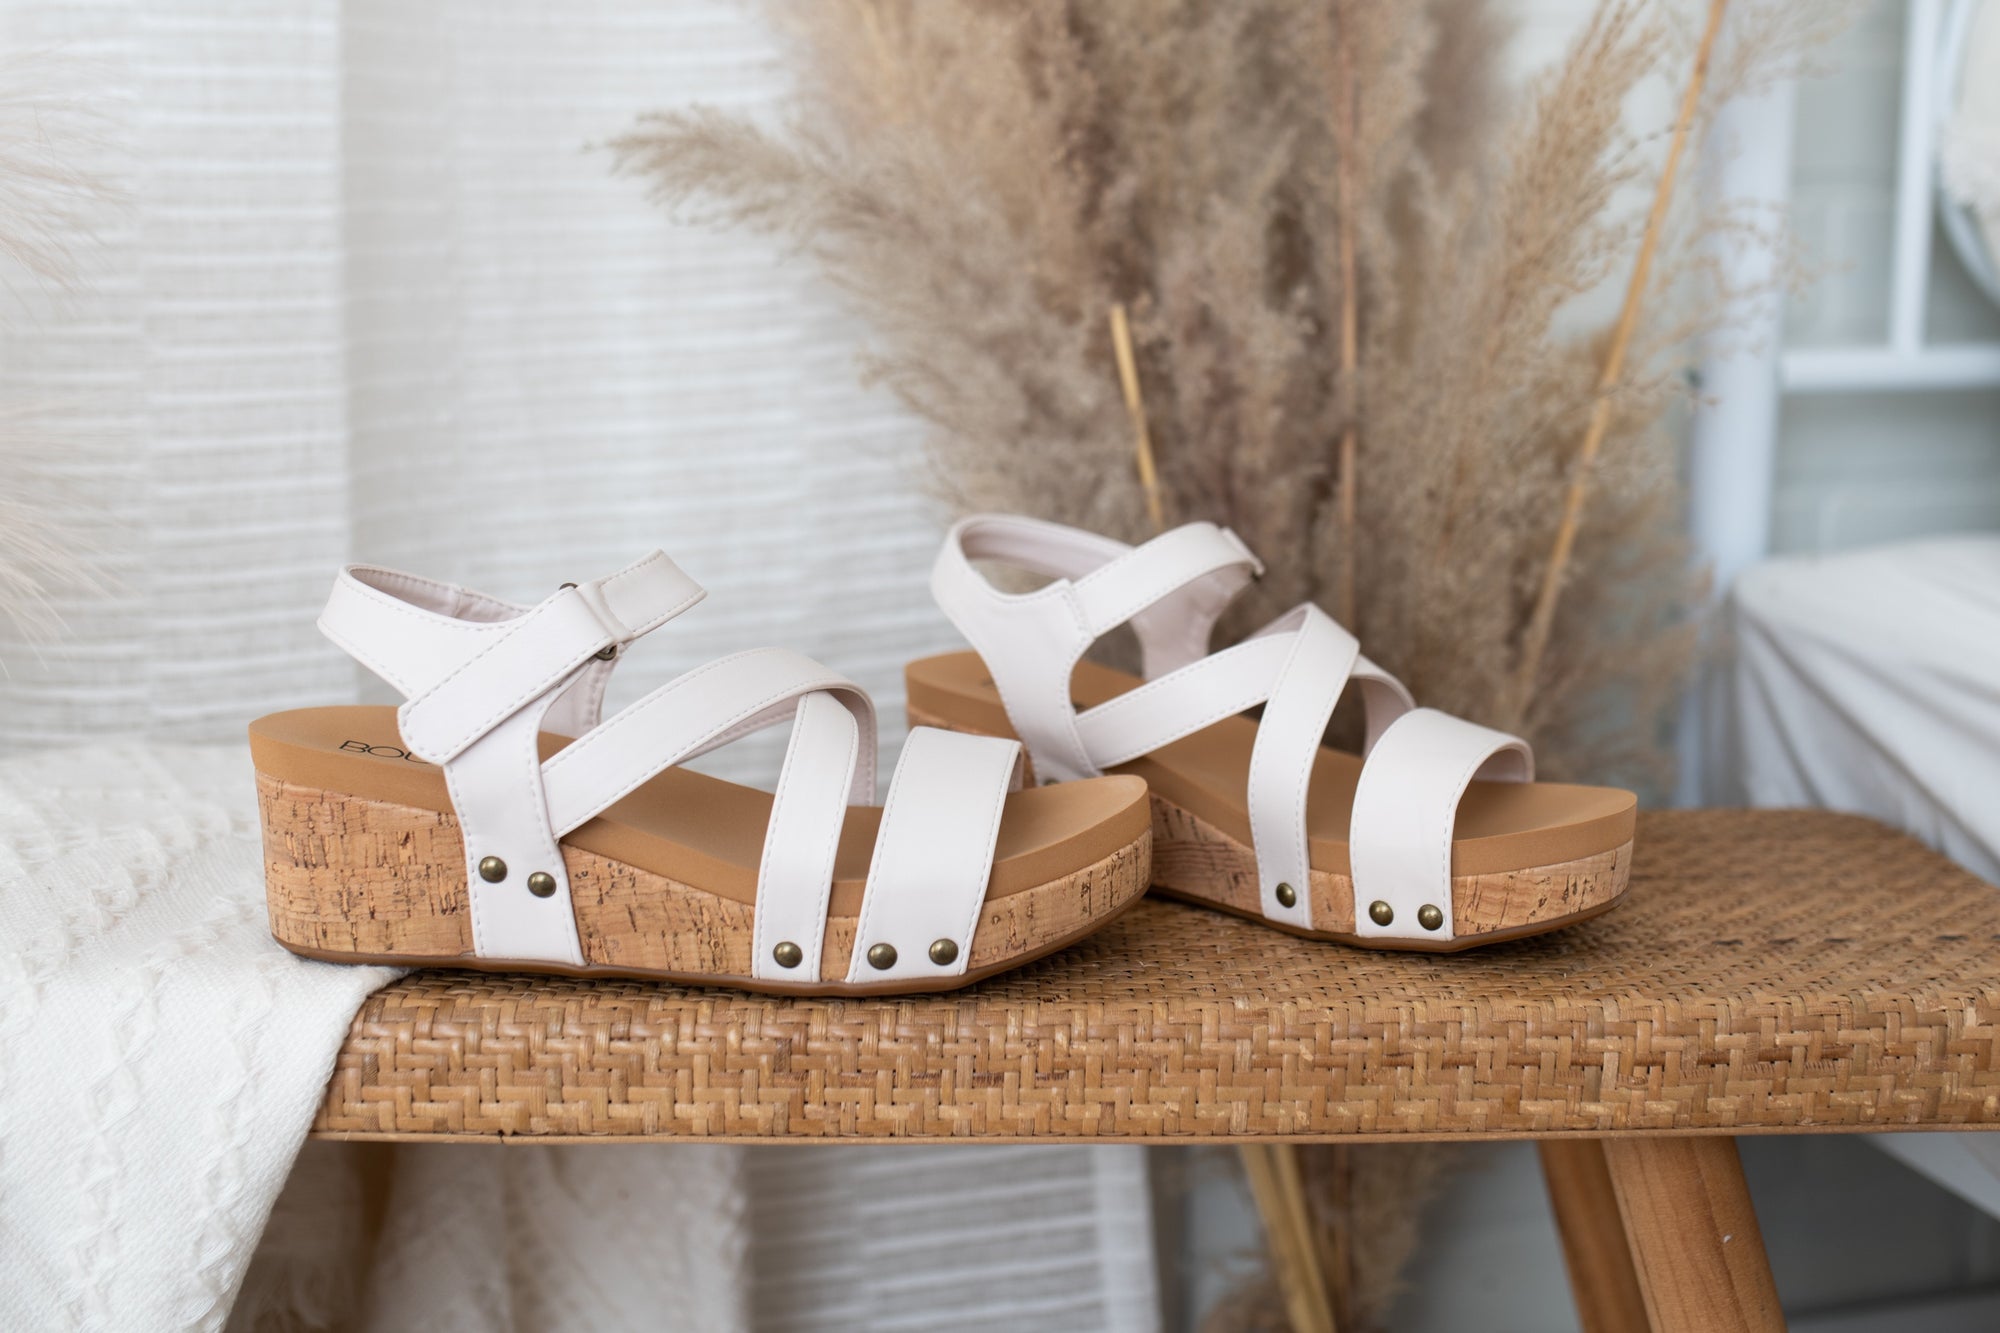 Sun Down Ivory Extra Strappy Wedge